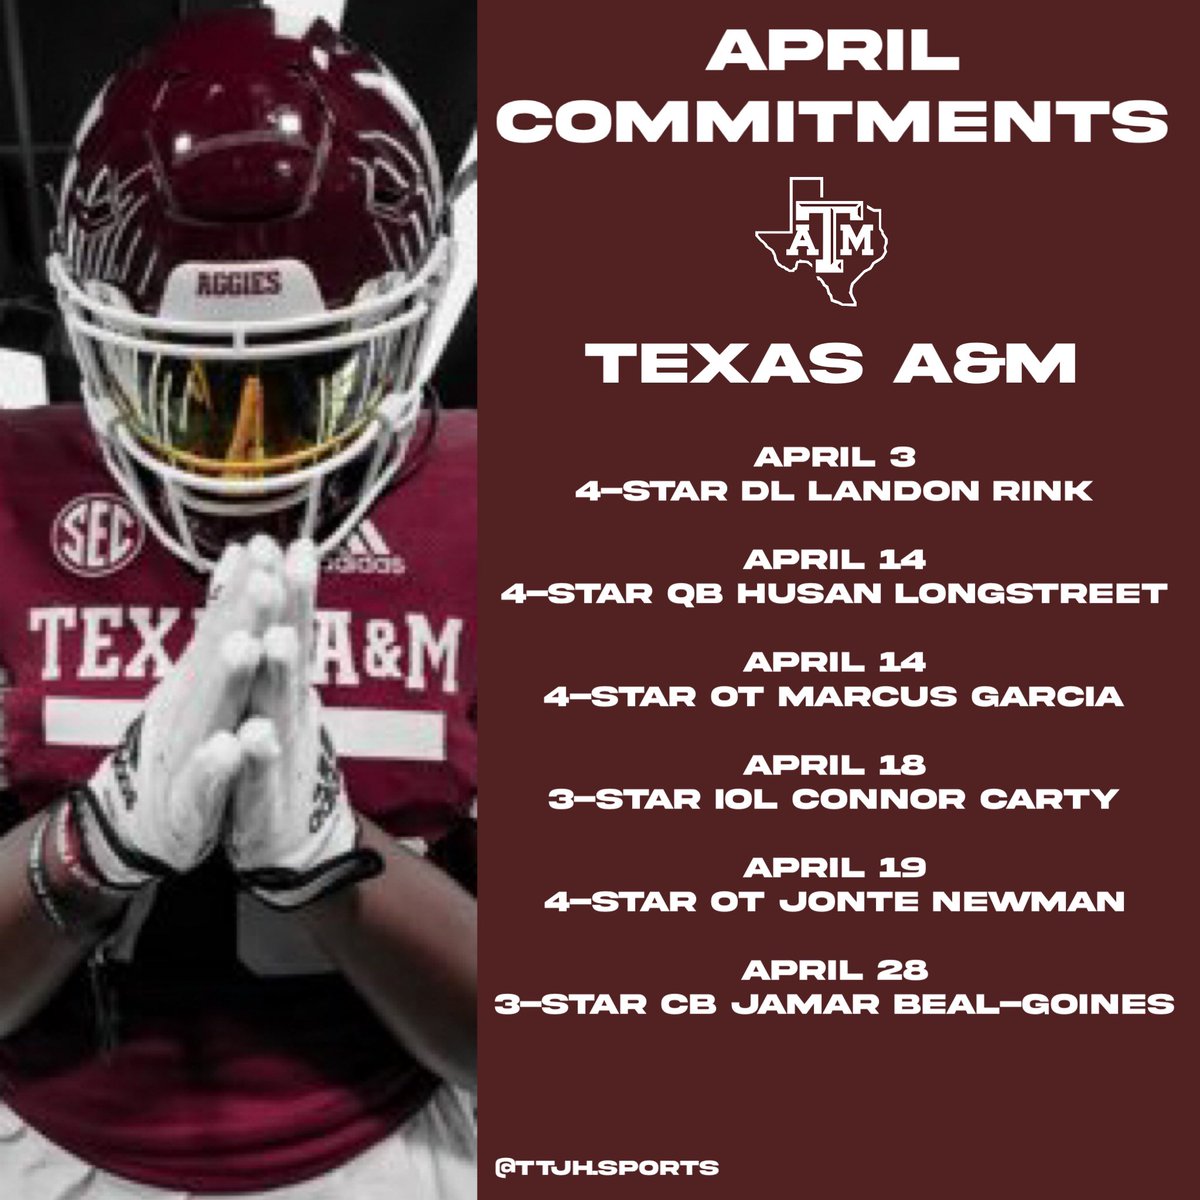 #TexasAM is coming off a big month for recruiting, as the Aggies landed six commitments in the month of April @HusanLongstreet @landonrink @ConnorCarty_ @JamarBealGoines @JonteNewman3 @mmarcusgarciaa